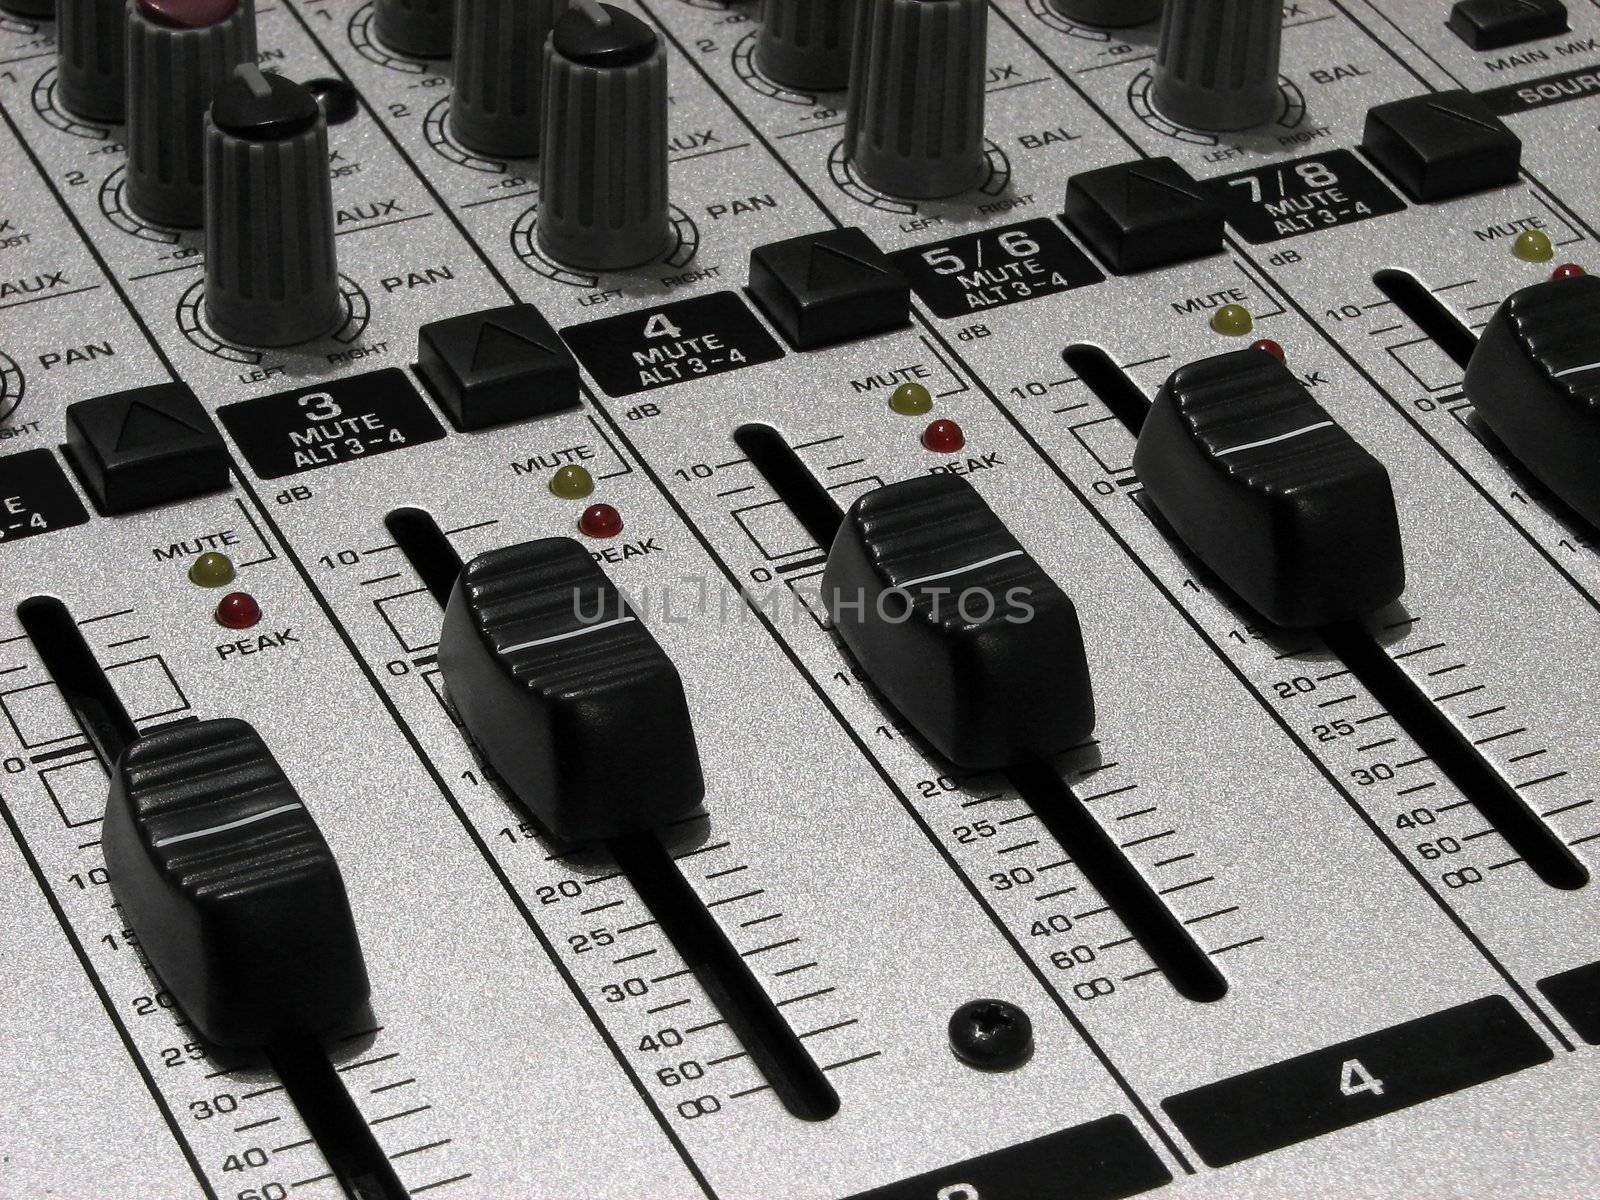 Mixing board for audio recording.